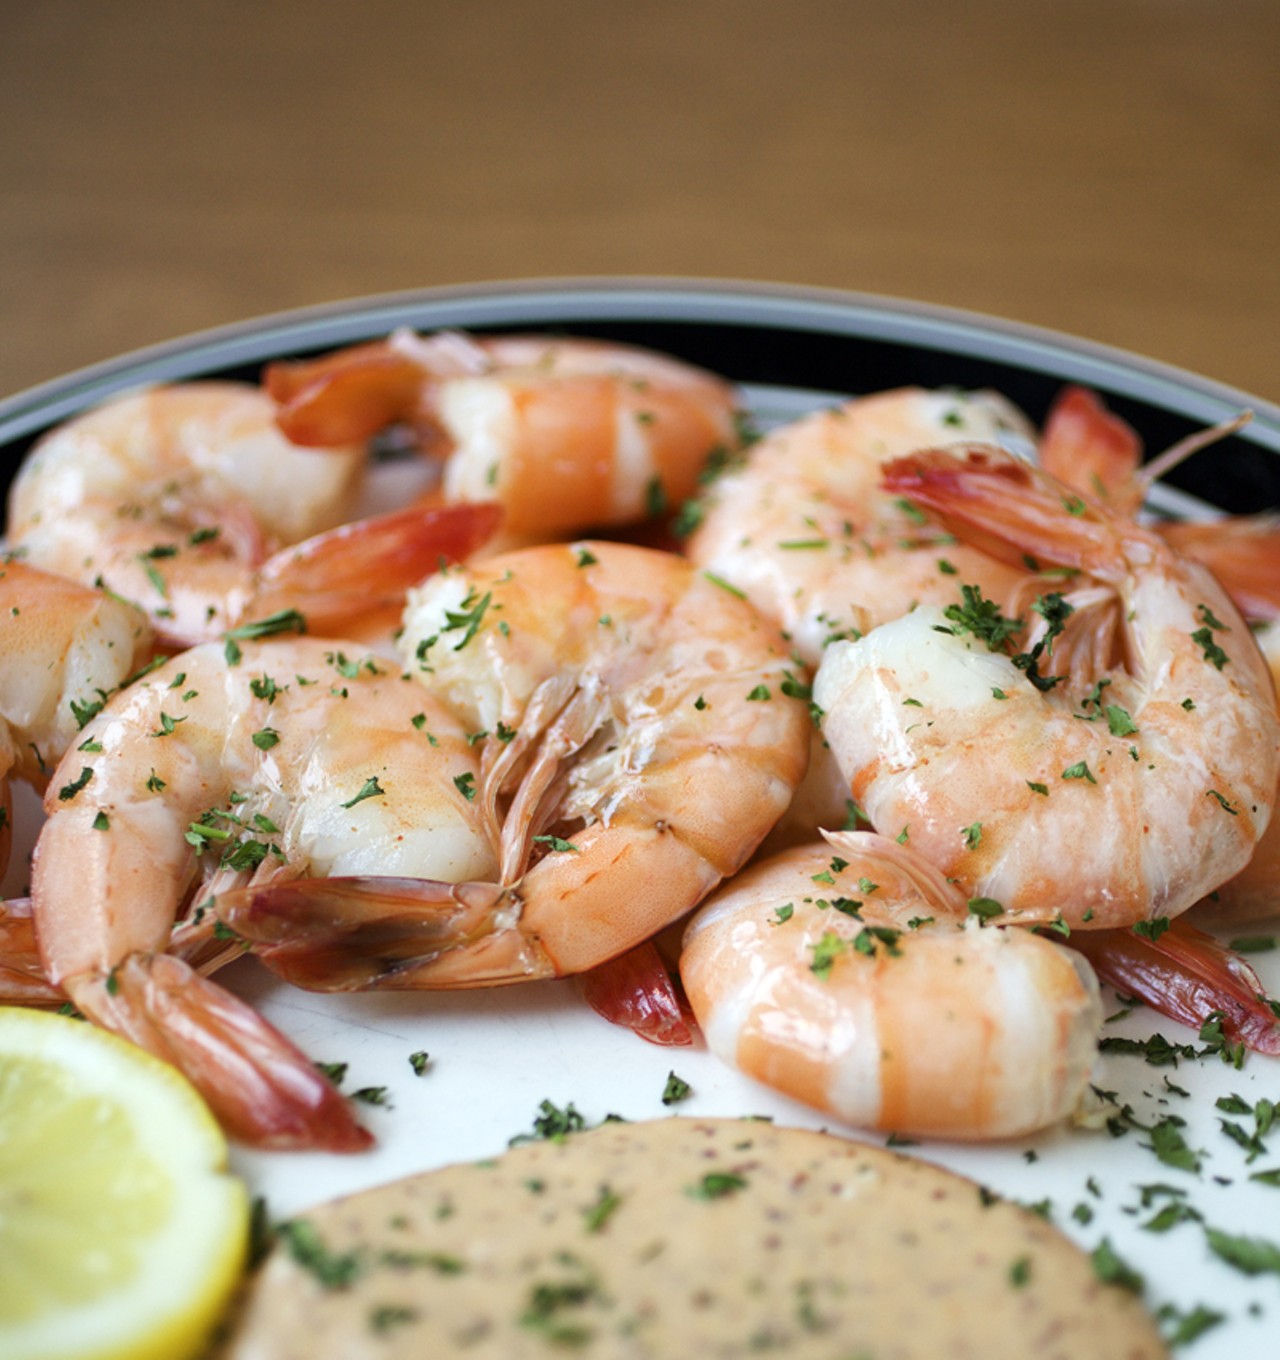 The peel & eat shrimp with the house-made New Orleans remoulade sauce.